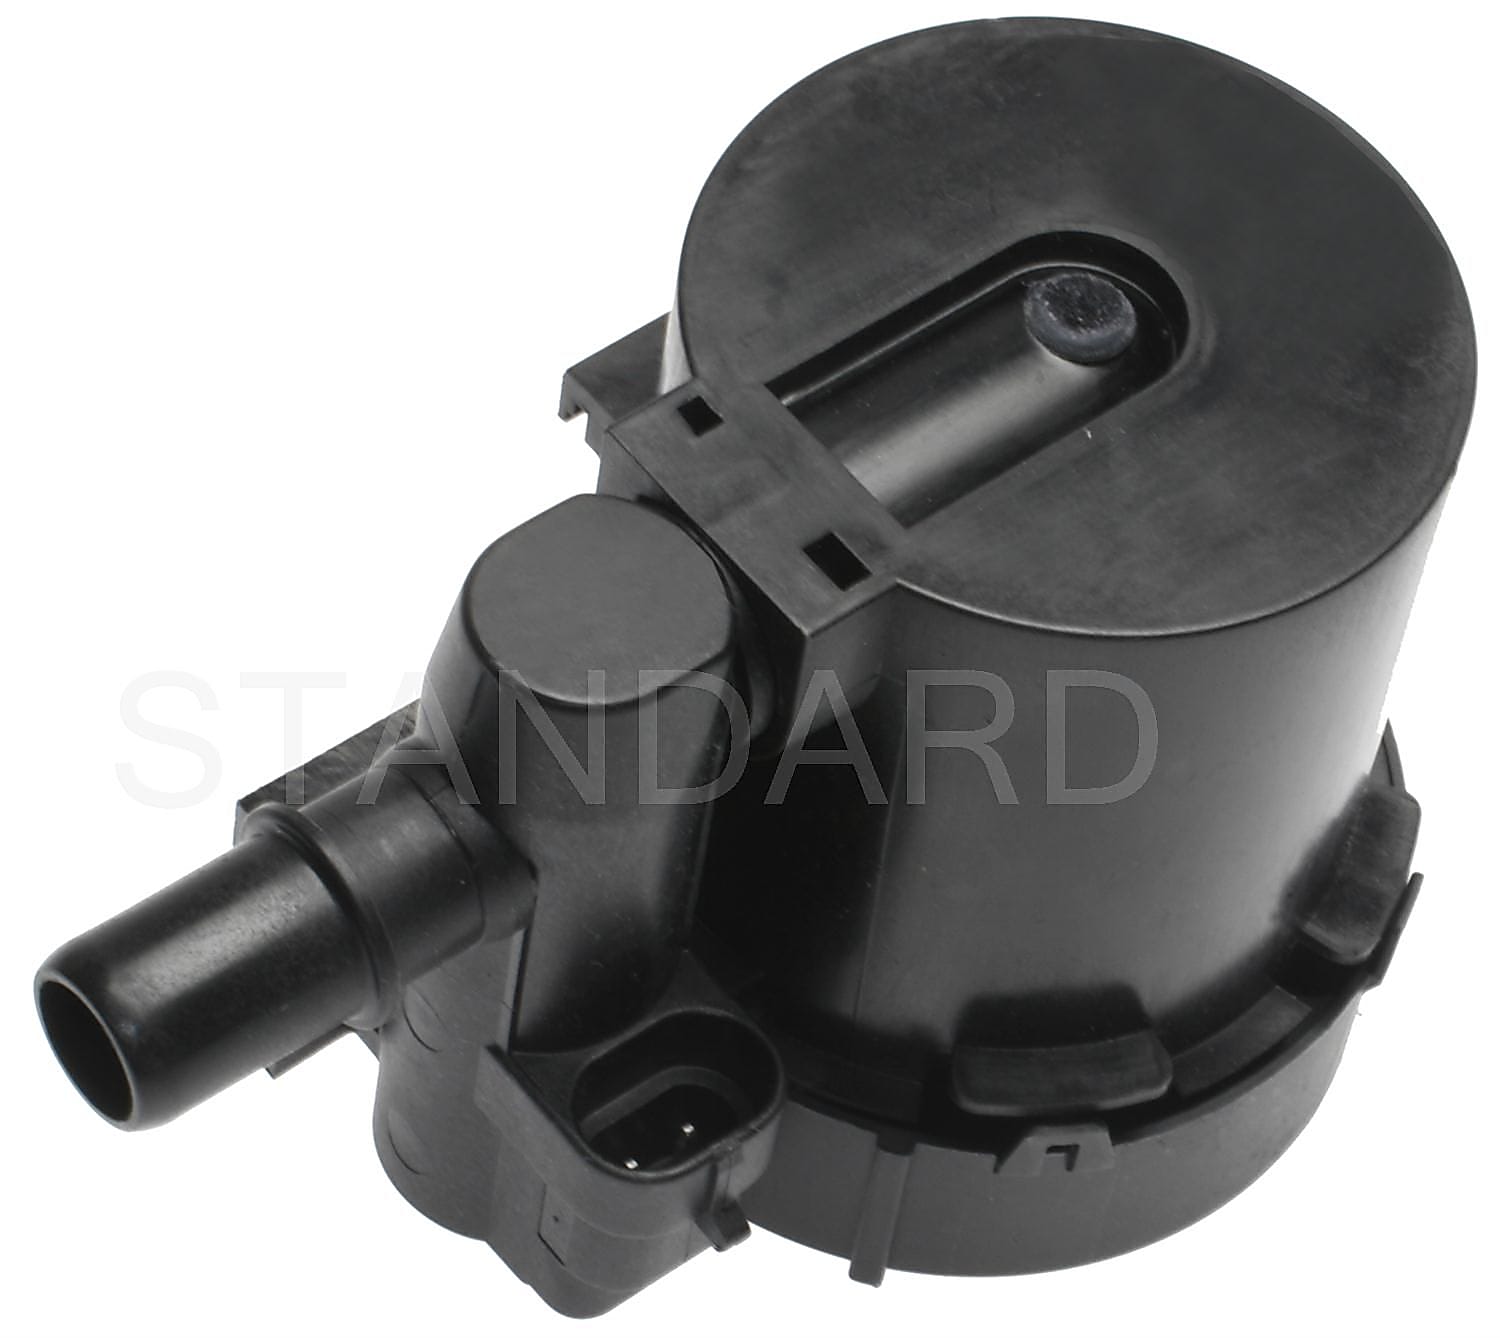 2006 Chevrolet Silverado 2500 HD Vapor Canister Vent Solenoids from $27 